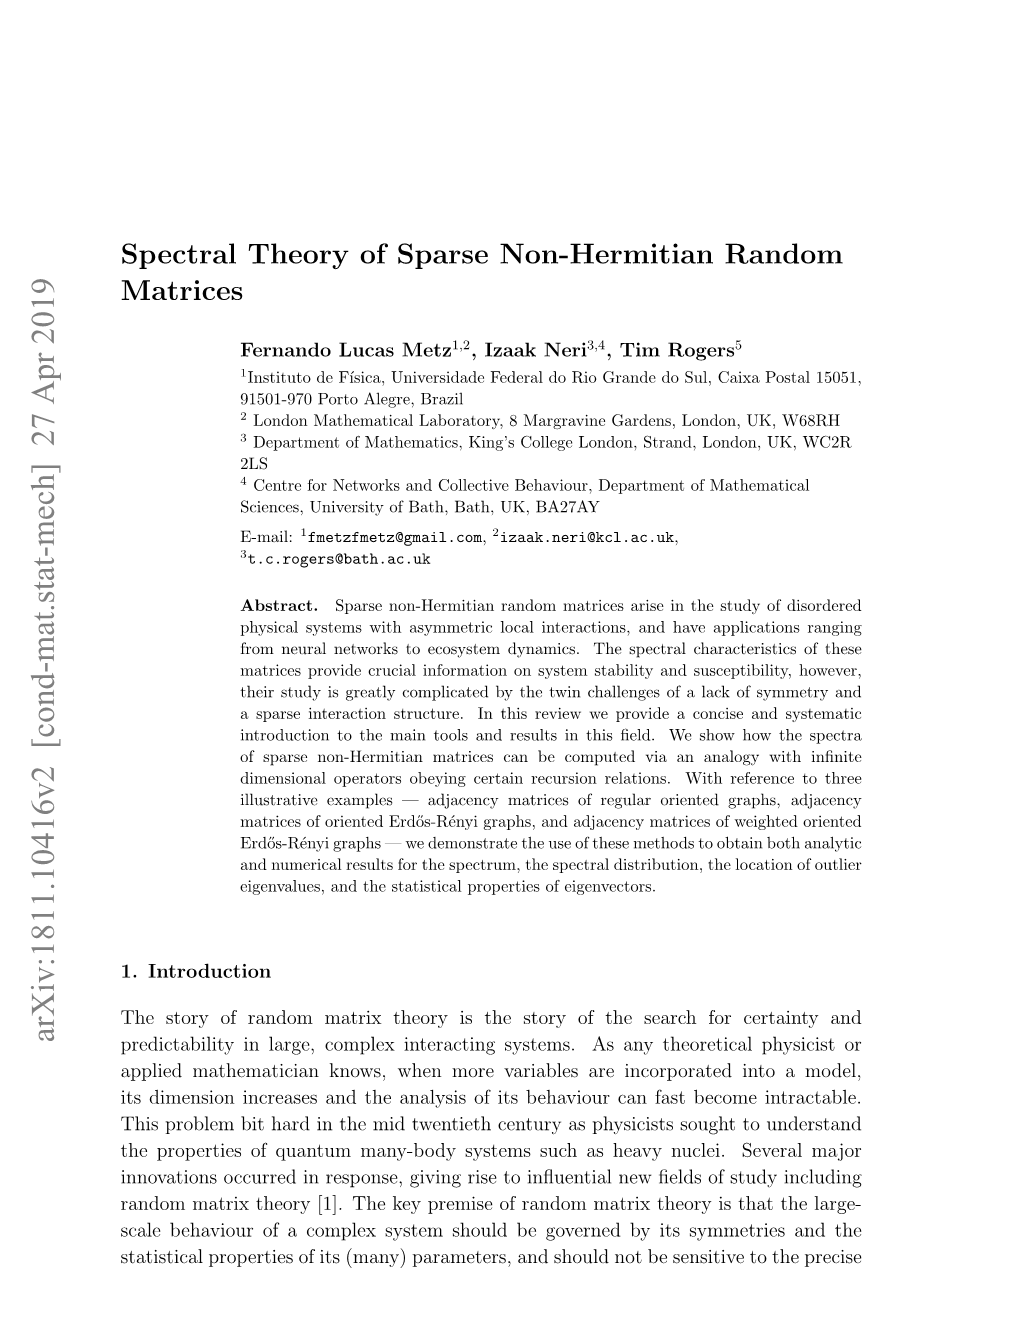 Spectral Theory of Sparse Non-Hermitian Random Matrices